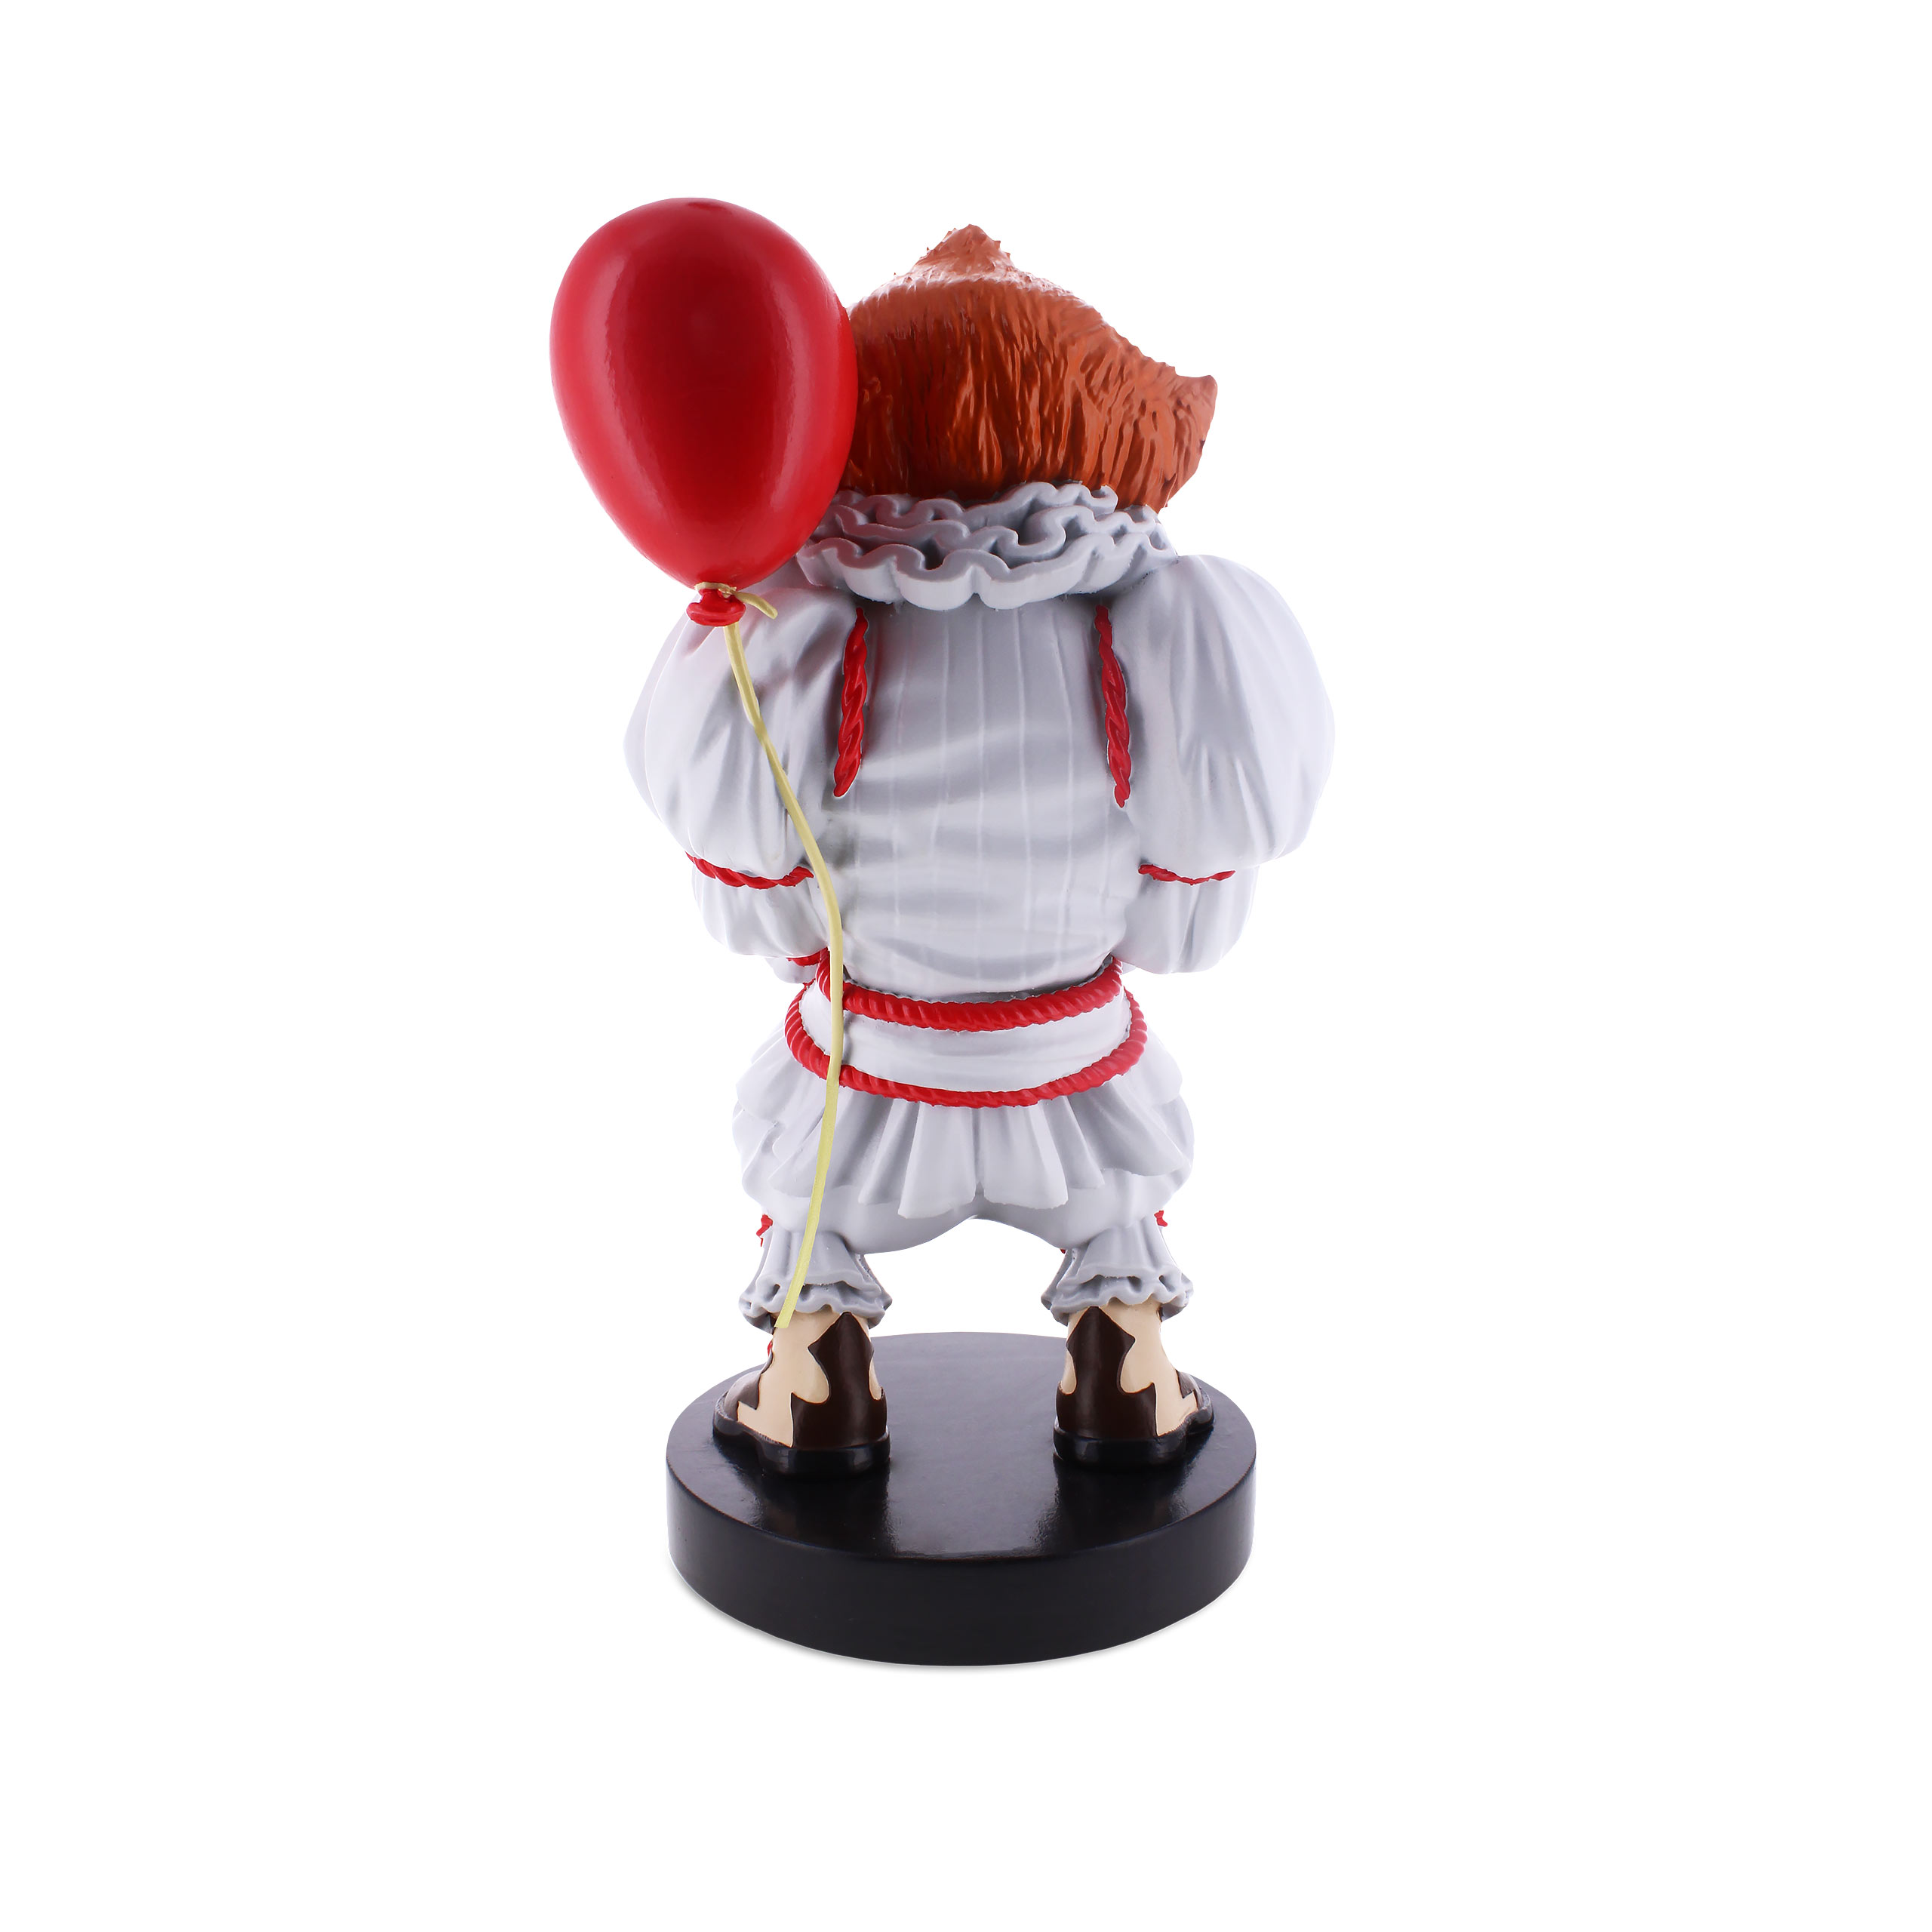 Stephen King's IT - Figurine Cable Guy Pennywise